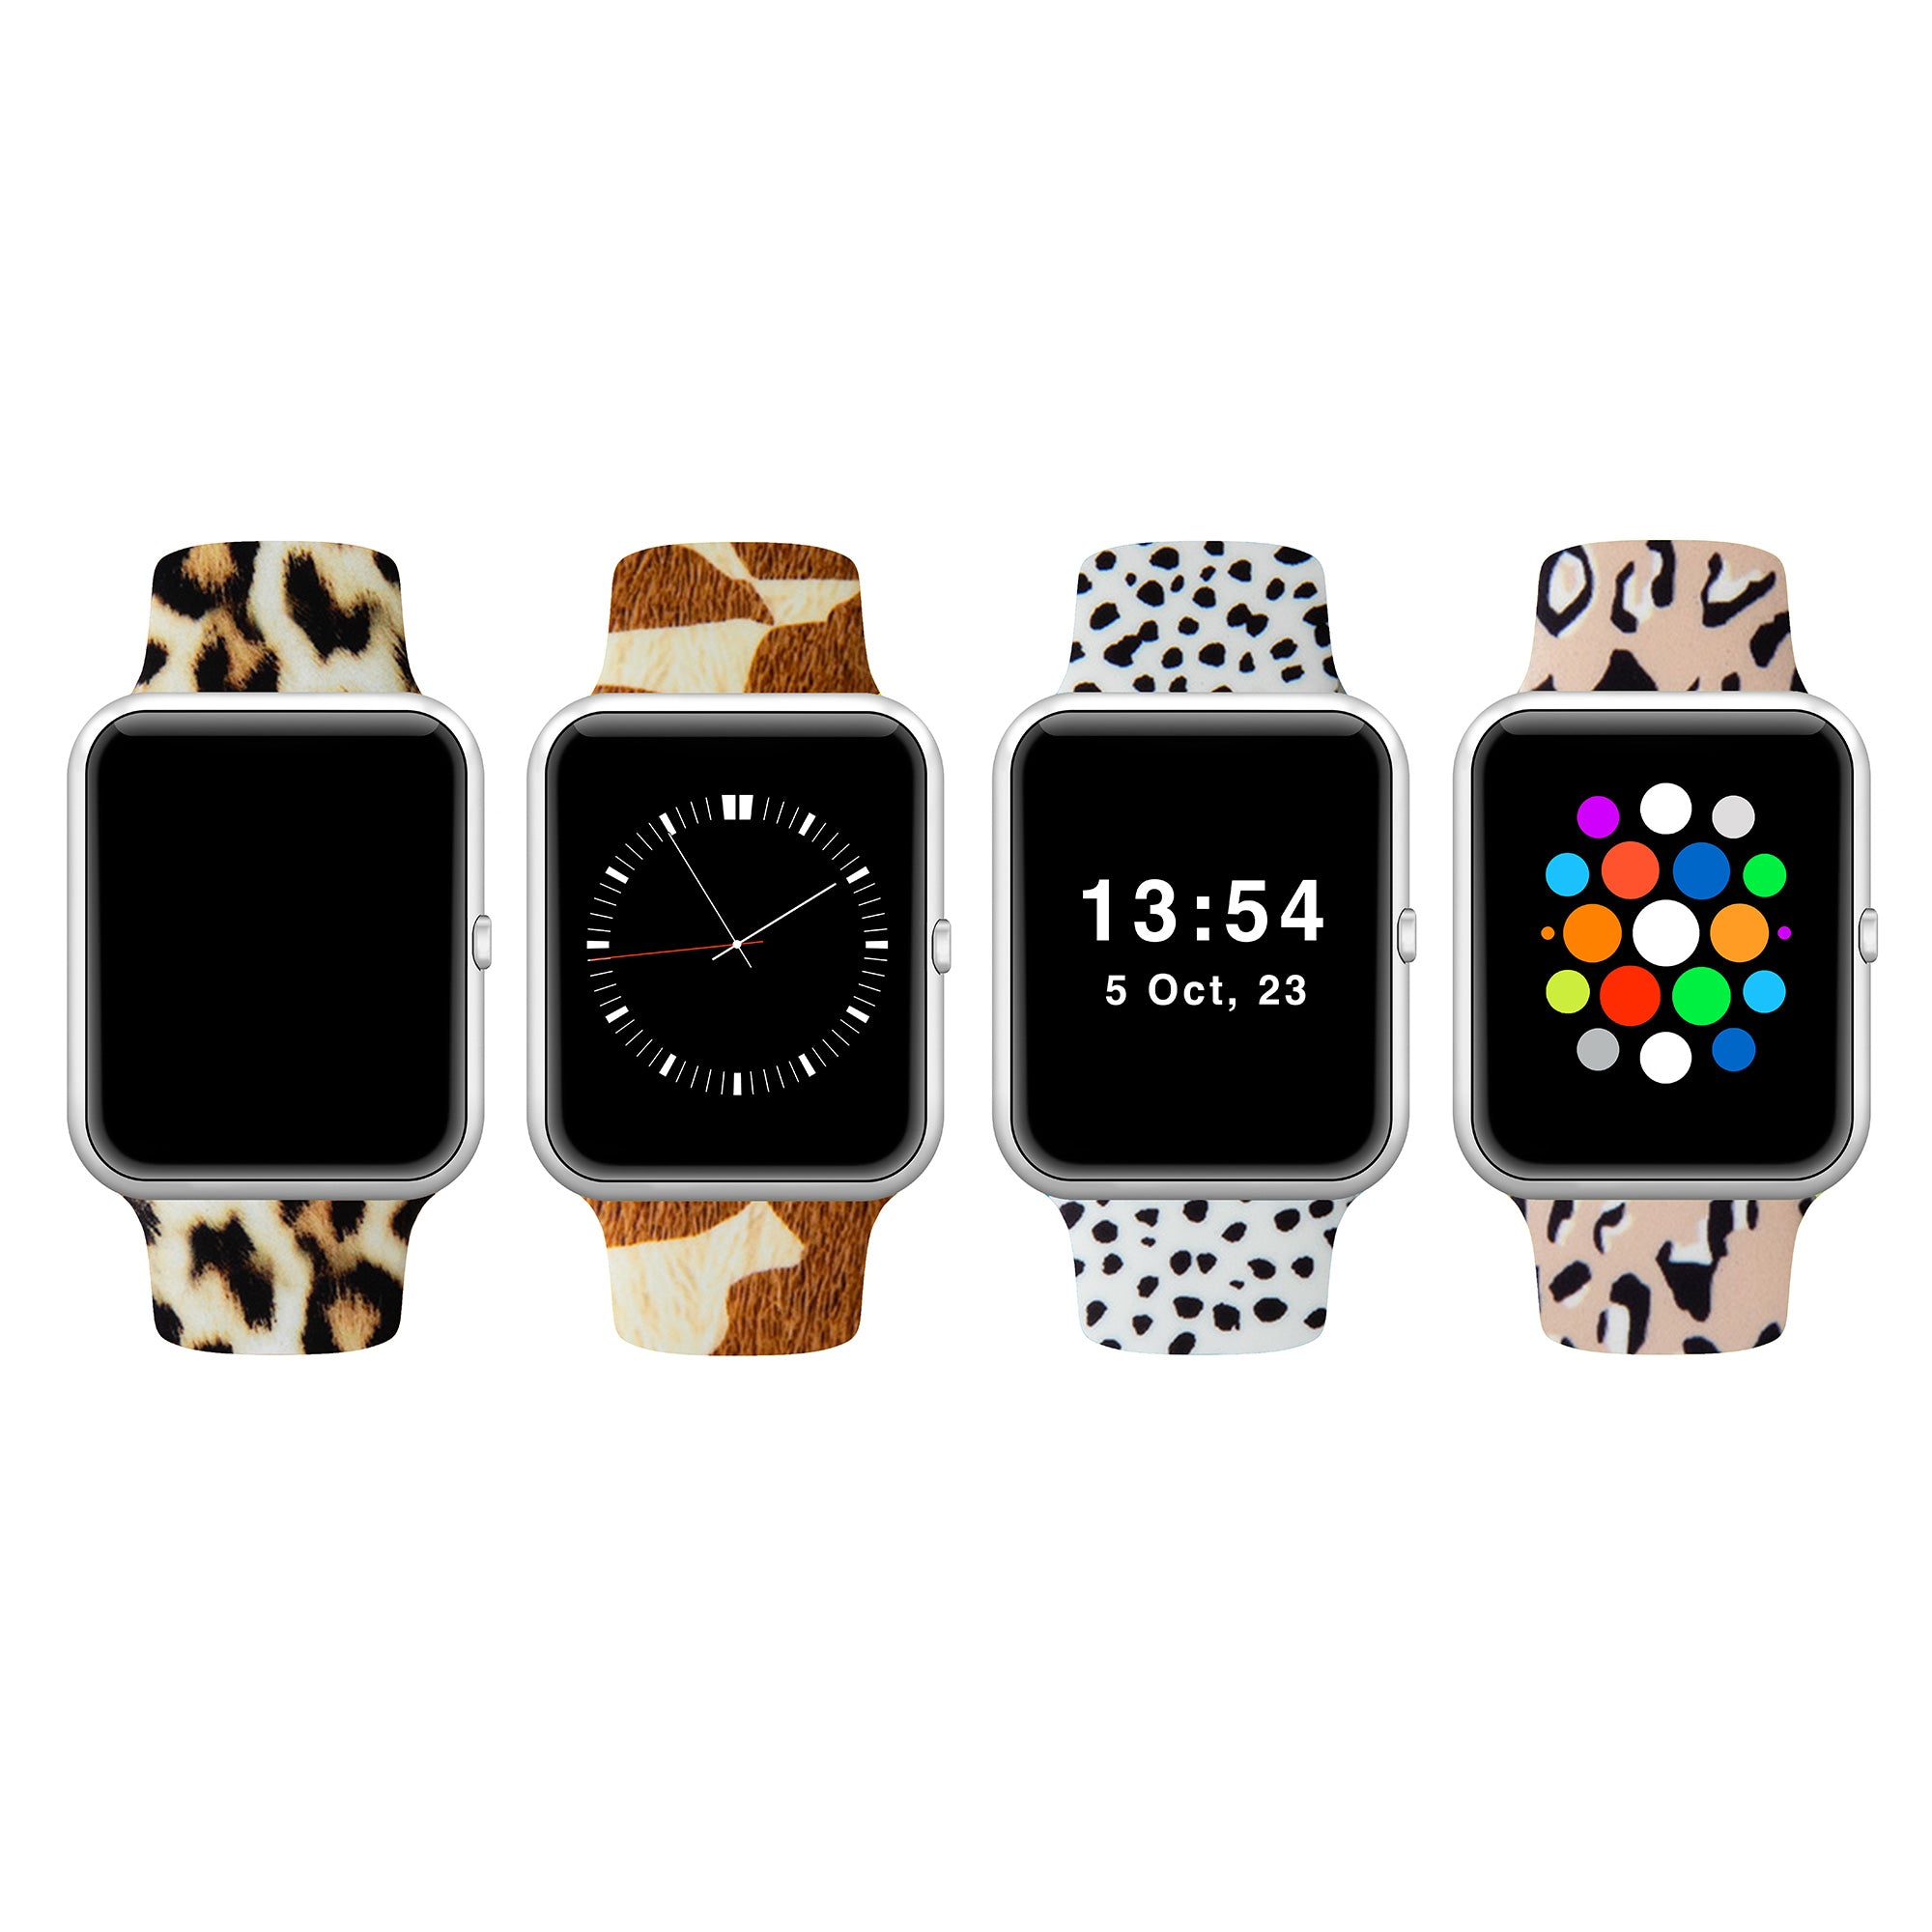 Patterned Silicone Apple Watch Band 38mm/40mm 42mm/44mm - Cut Out Paws - Black - 38mm/40mm